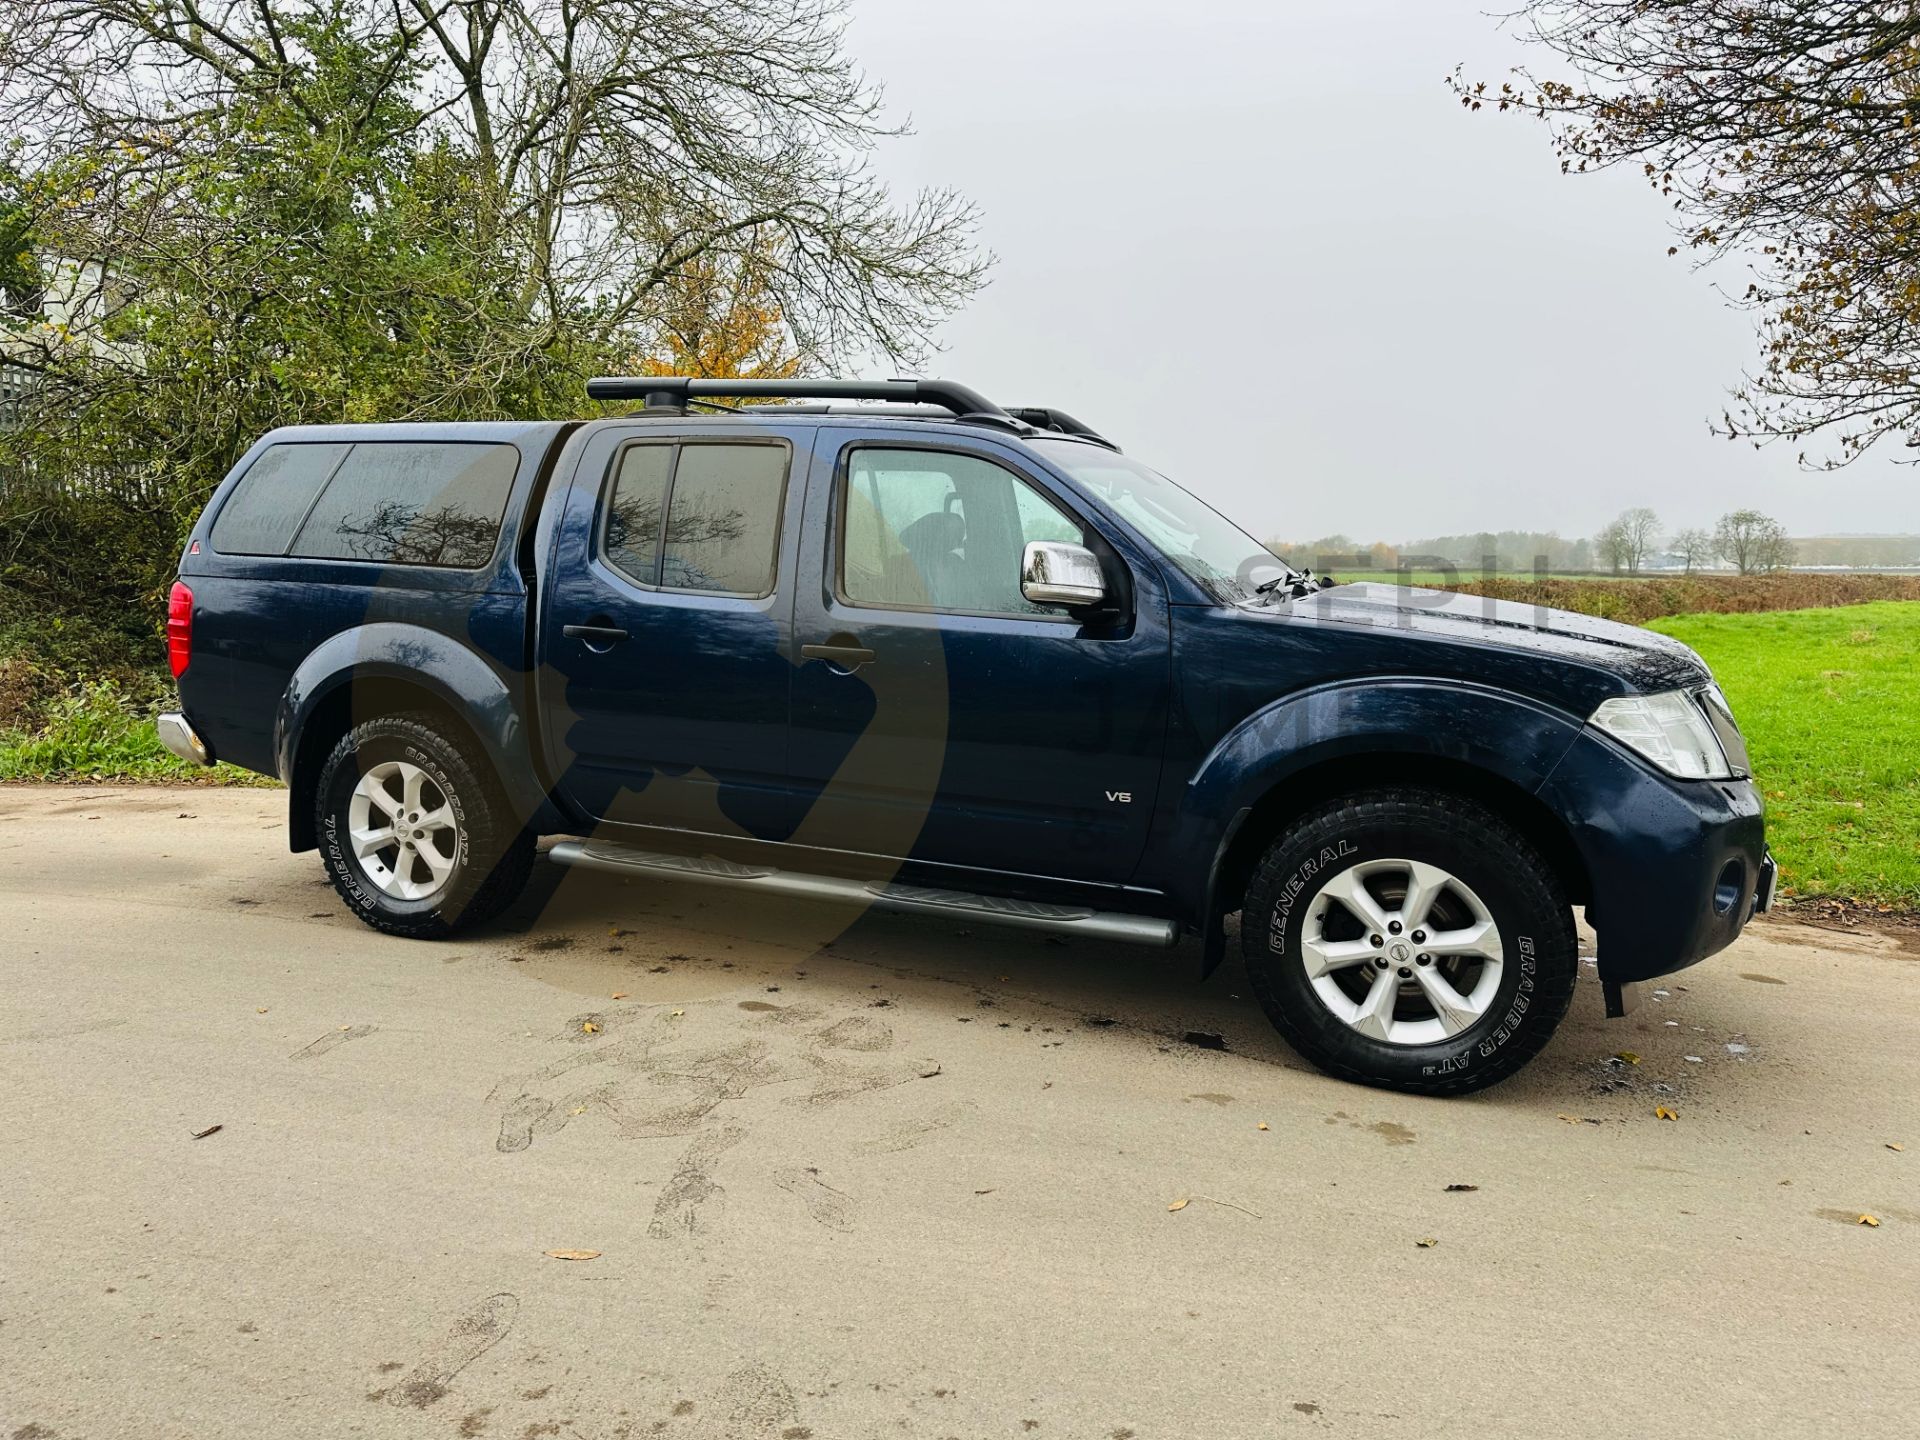 (ON SALE)NISSAN NAVARA *OUTLAW EDITION* 3.0 V6 TURBO DIESEL AUTOMATIC DOUBLE CAB PICKUP - 11 REG